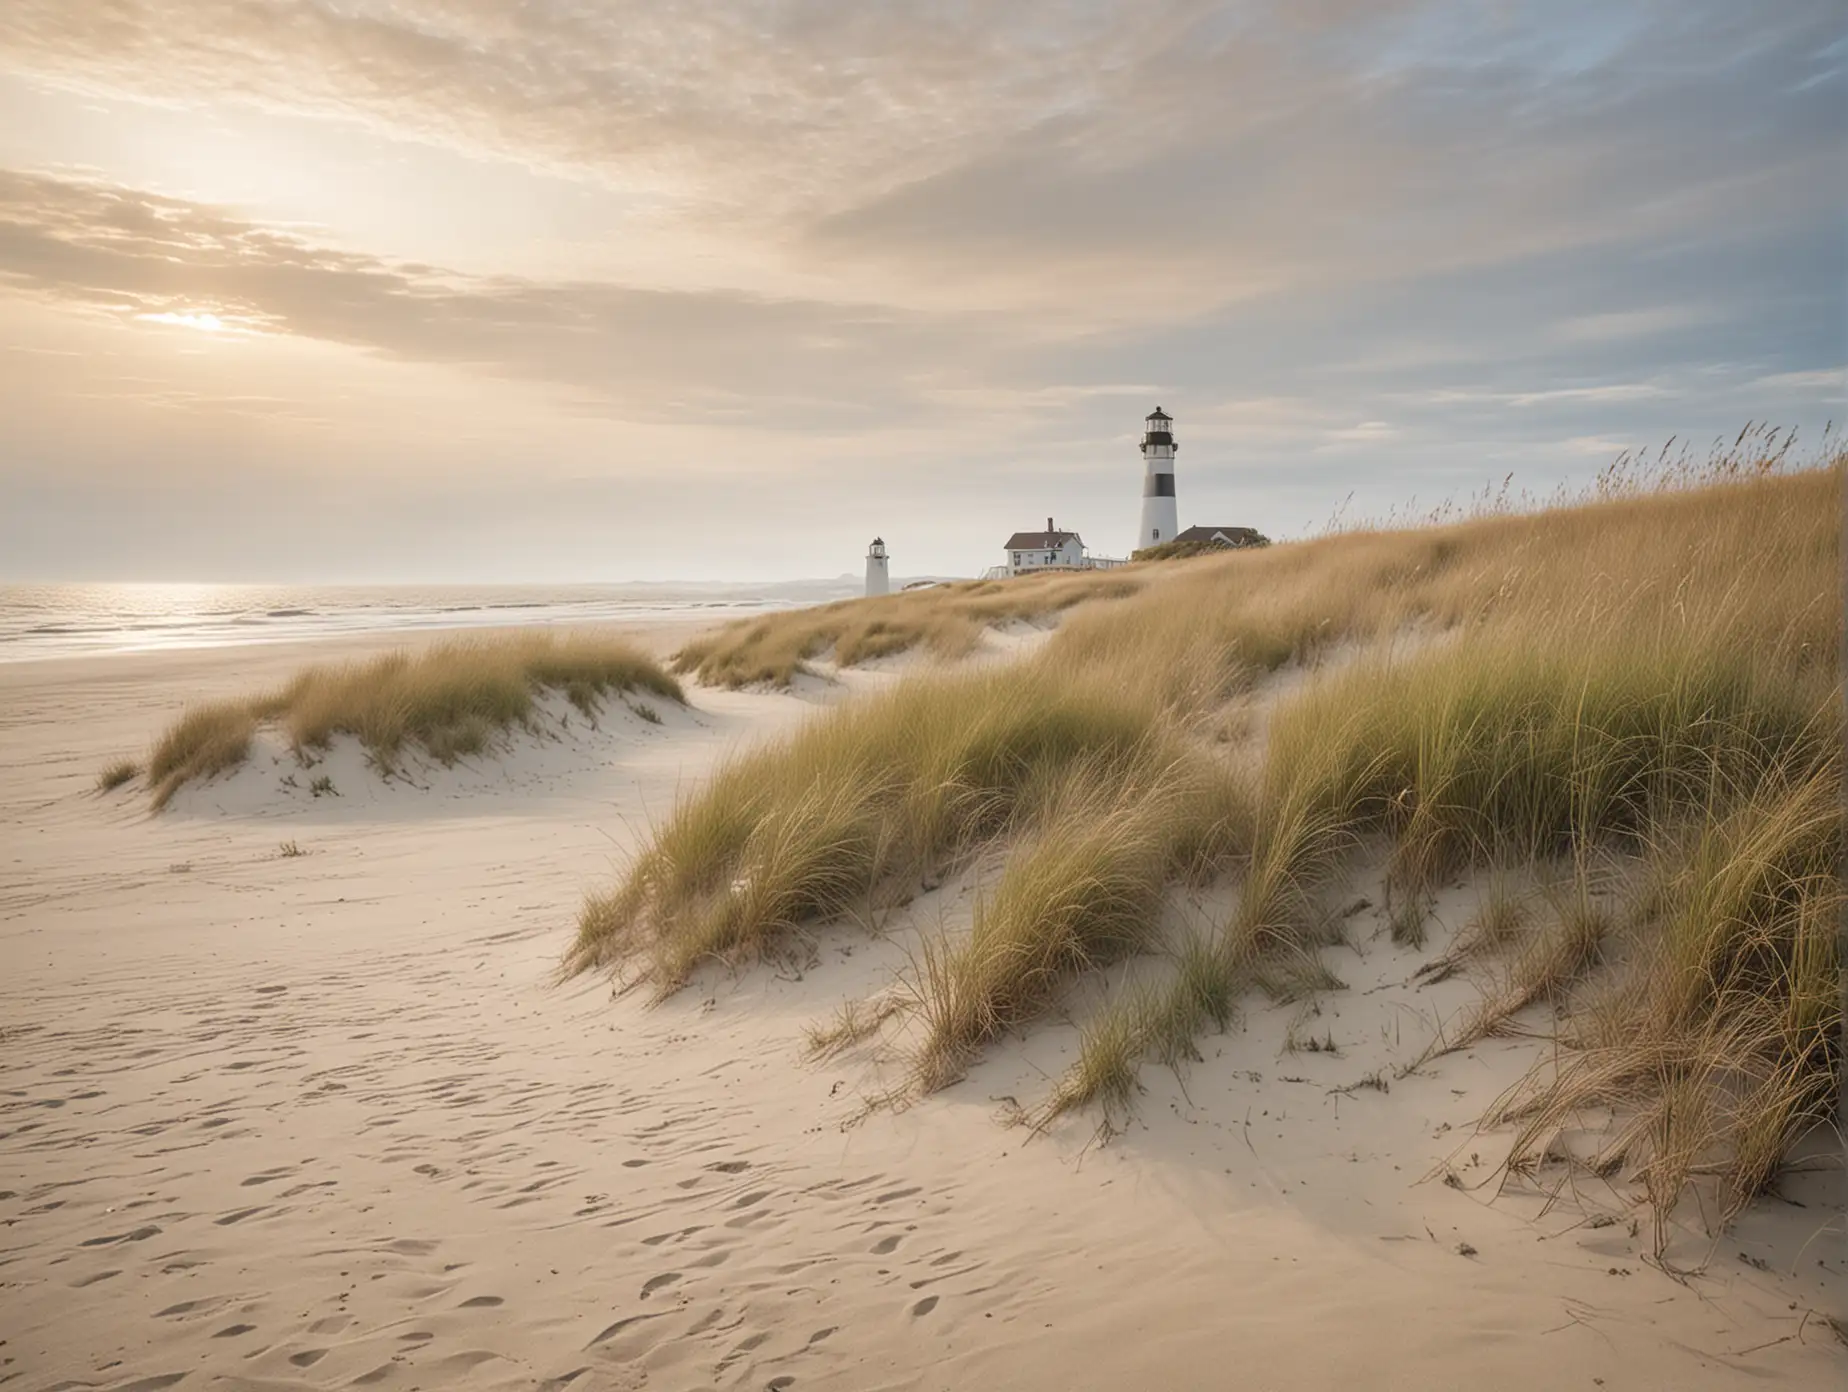 Tranquil Coastal Scene with Windswept Sand Dunes and Lighthouse